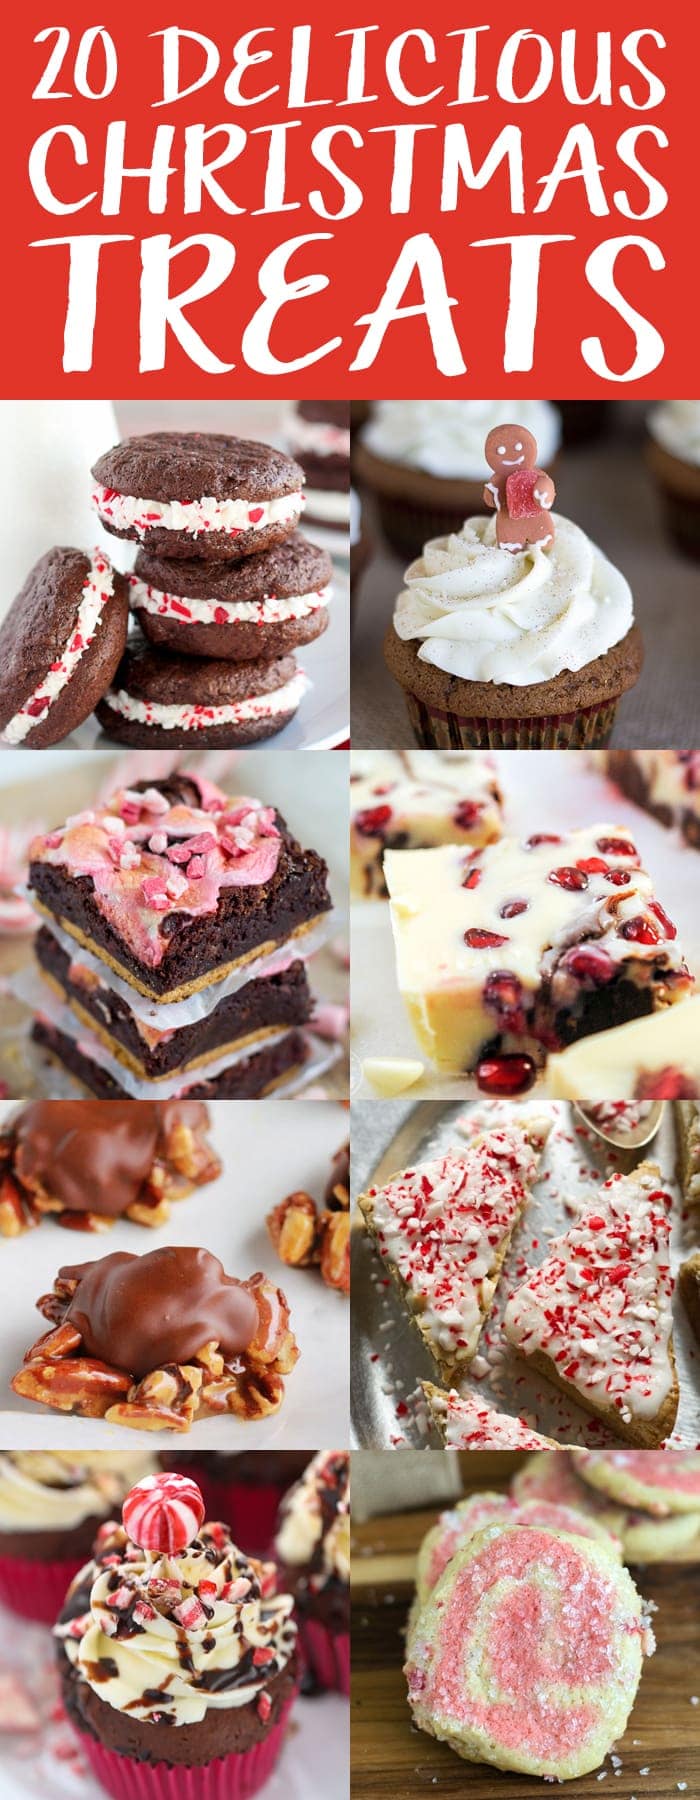 20 Delicious and Christmas Treats